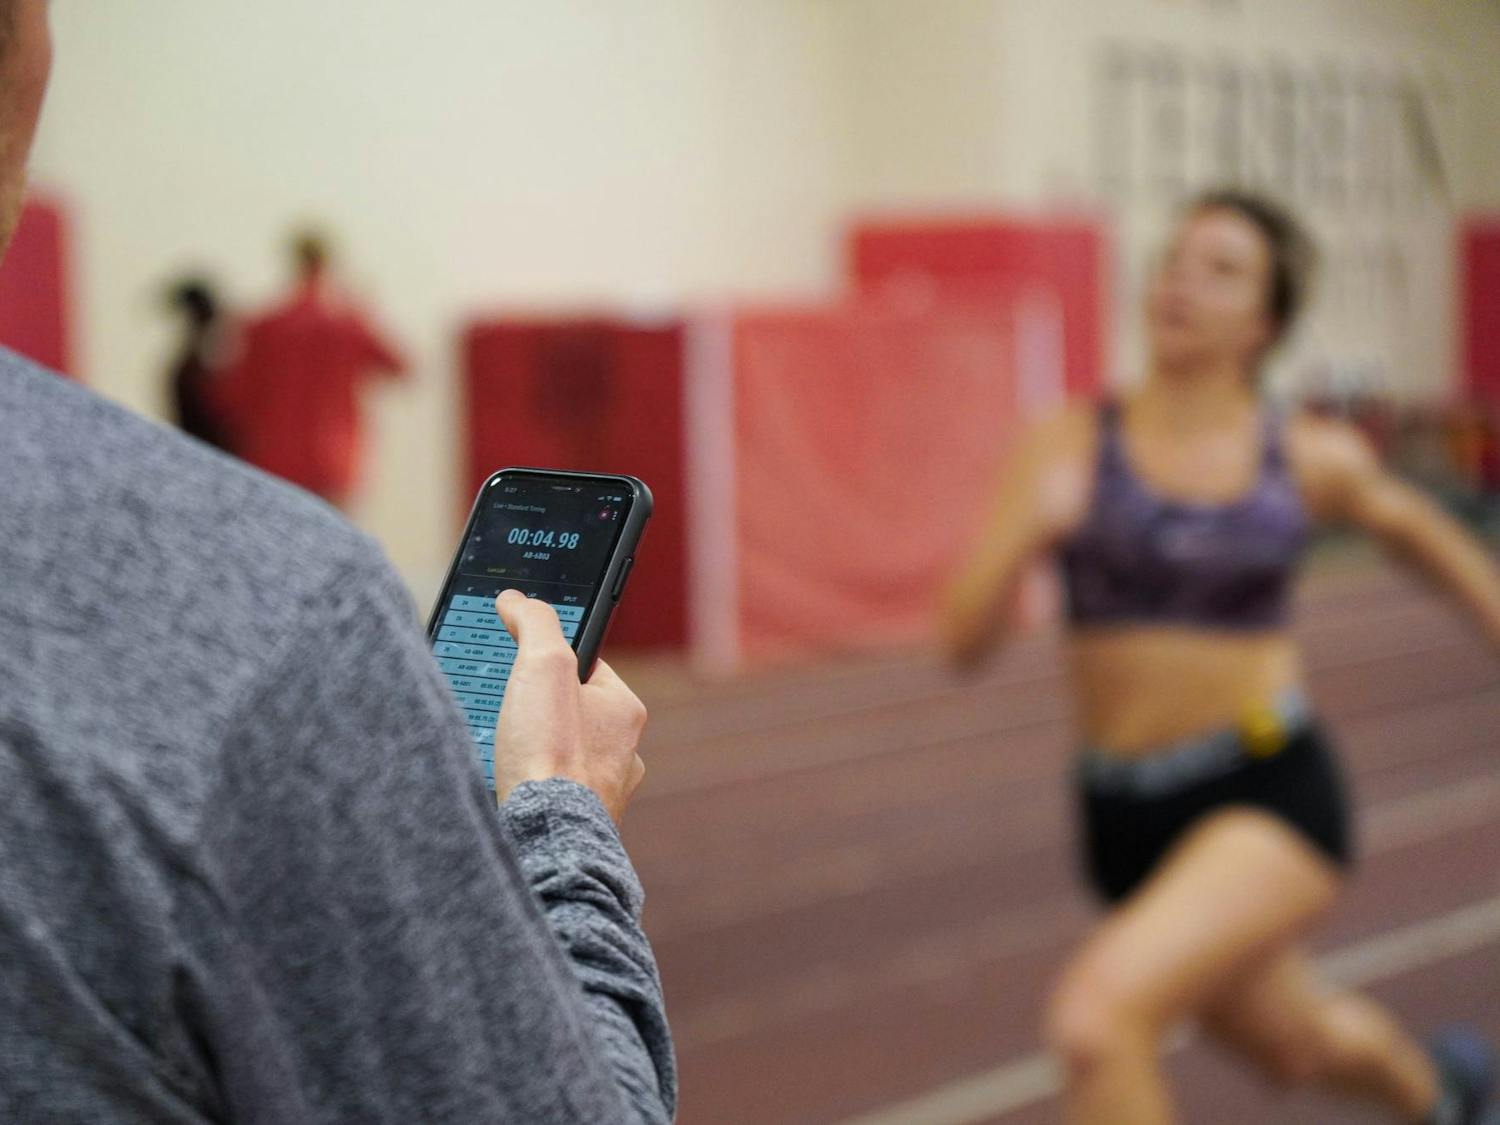 Back side of coach is positioned to the left of the frame. He holds his phone to check the student athlete's sprint time. The time reads 00.04.98. The student is blurred in the background running towards the finish line. 